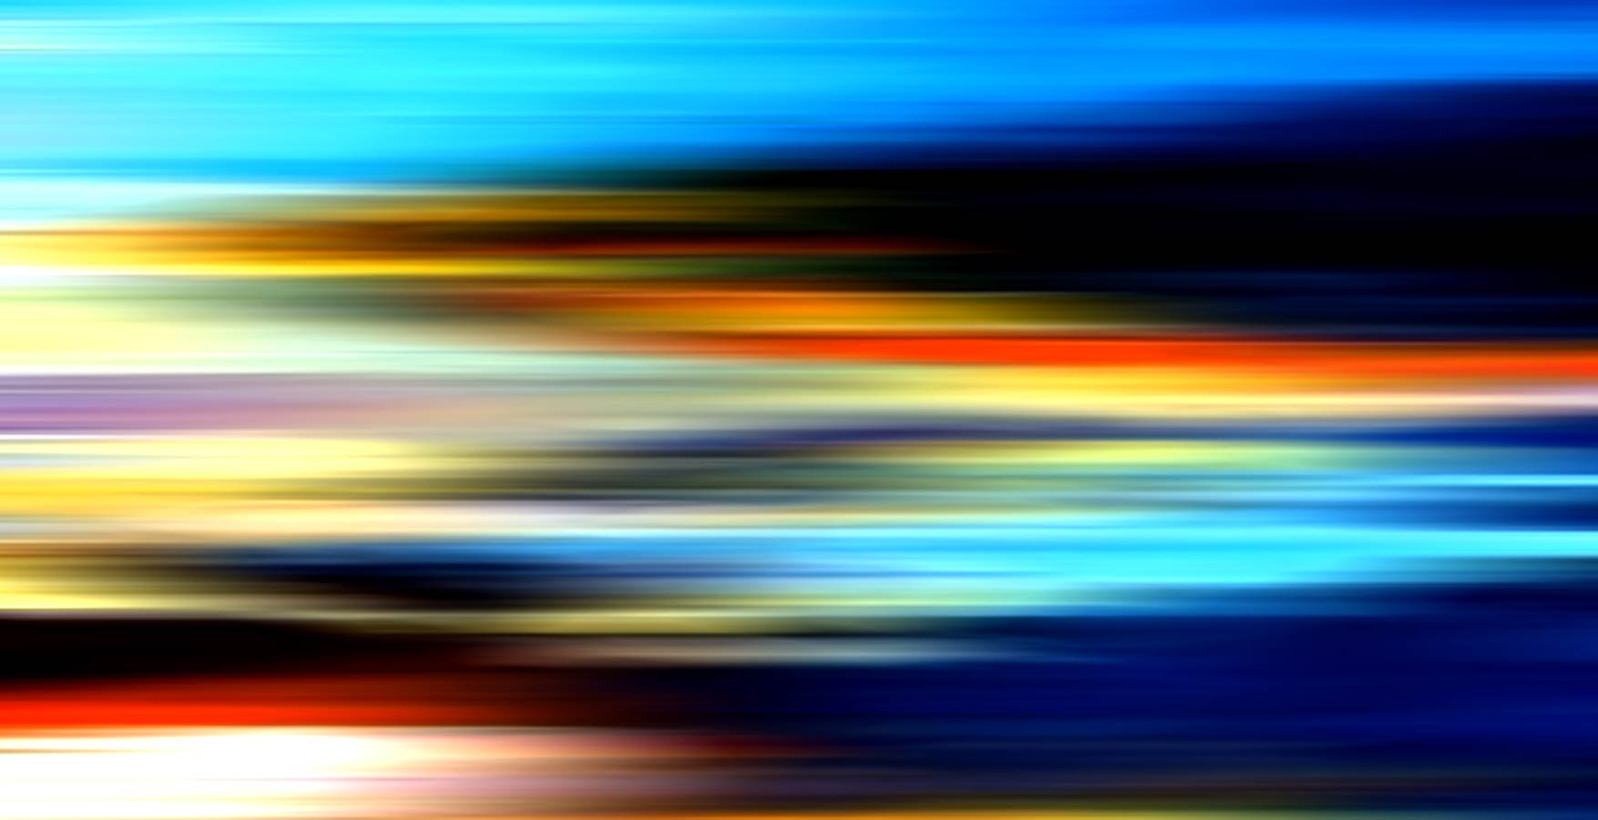 an abstract, vint blurred background that uses colors to enhance the effect of waves